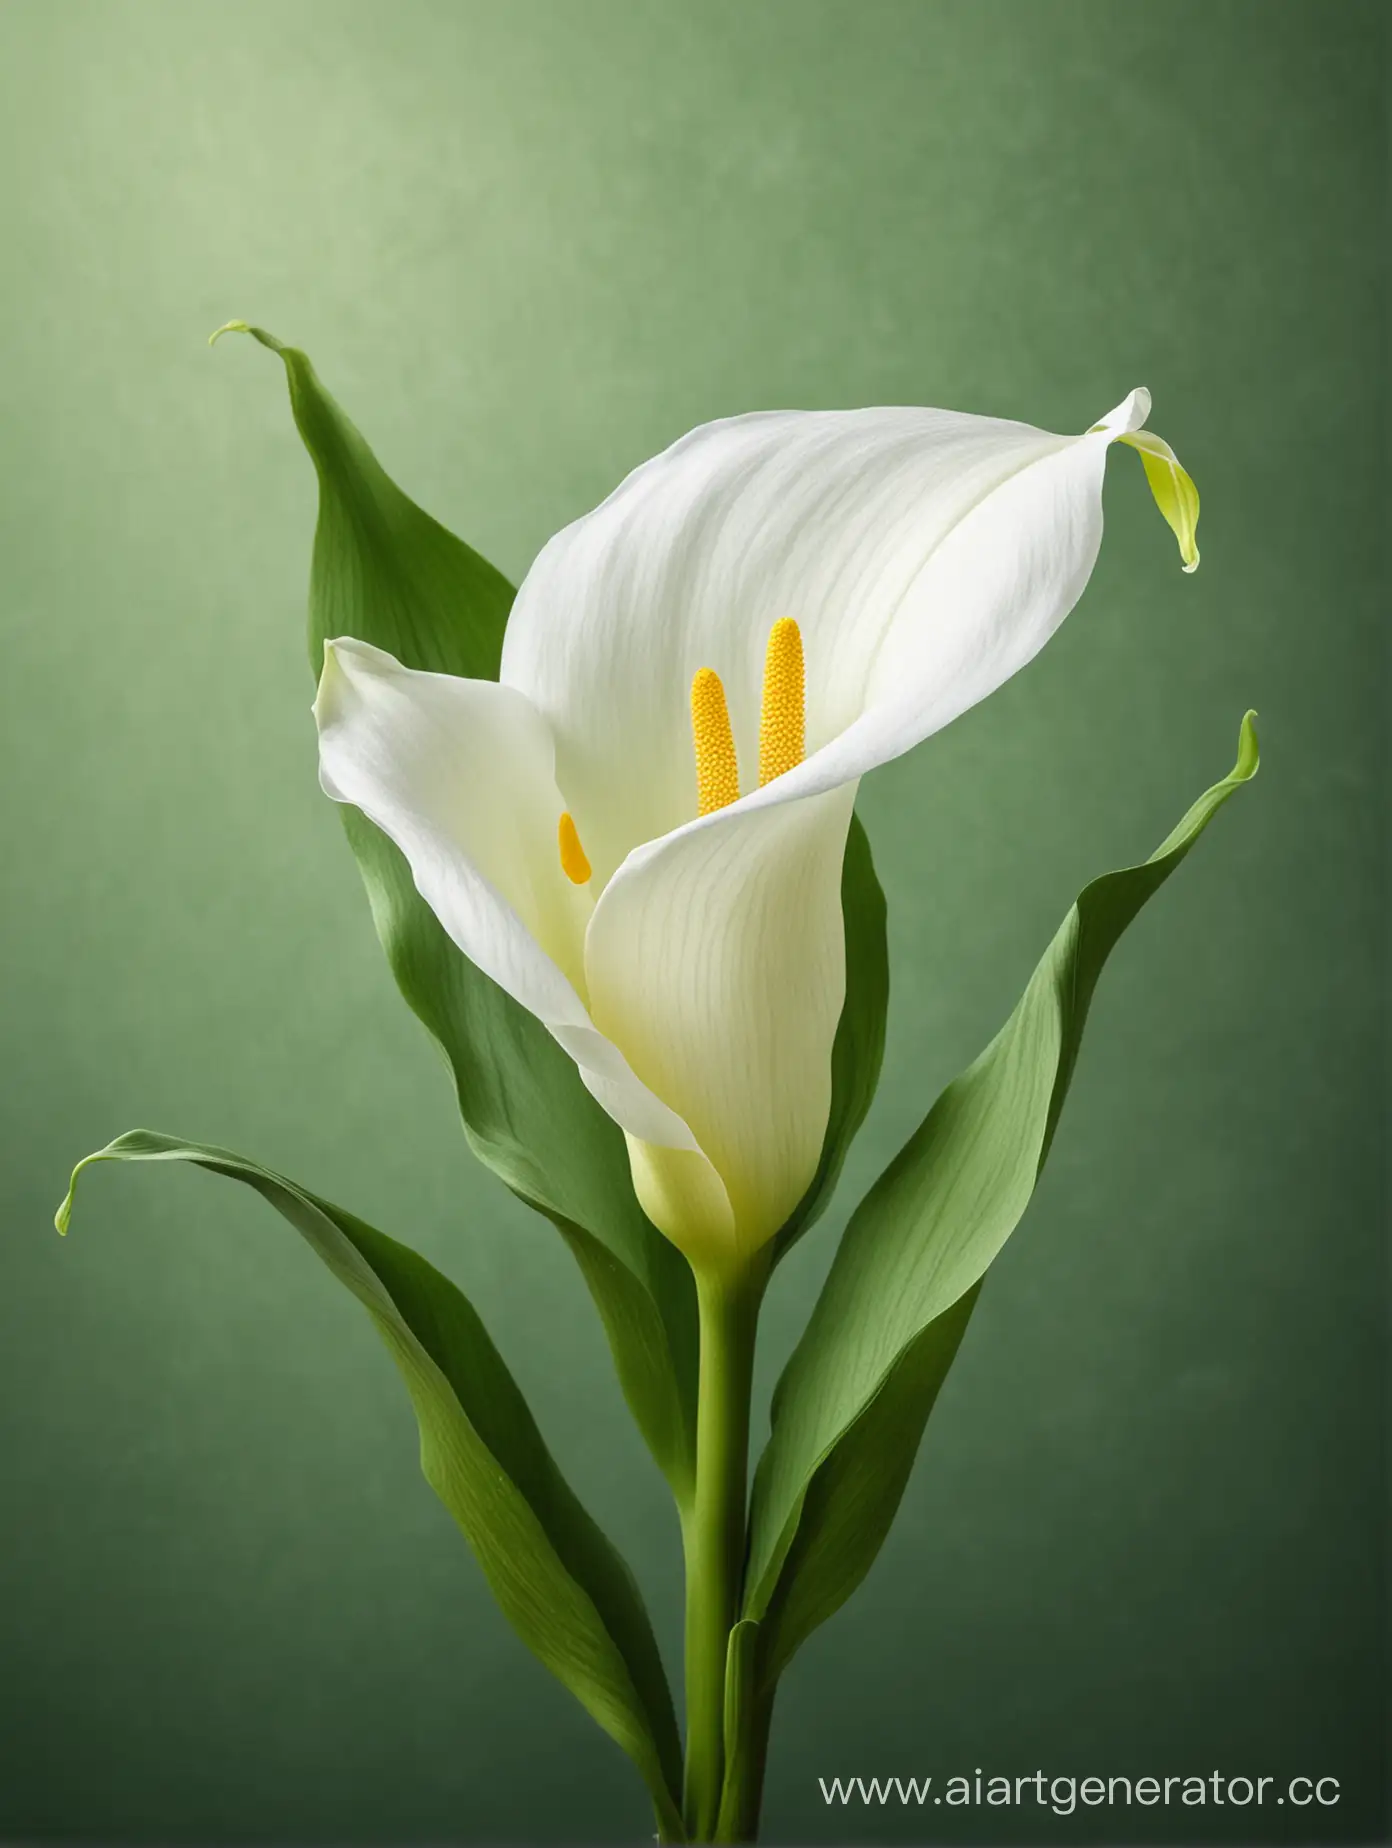 Vibrant-Calla-Lily-Flowers-on-Lush-Green-Background